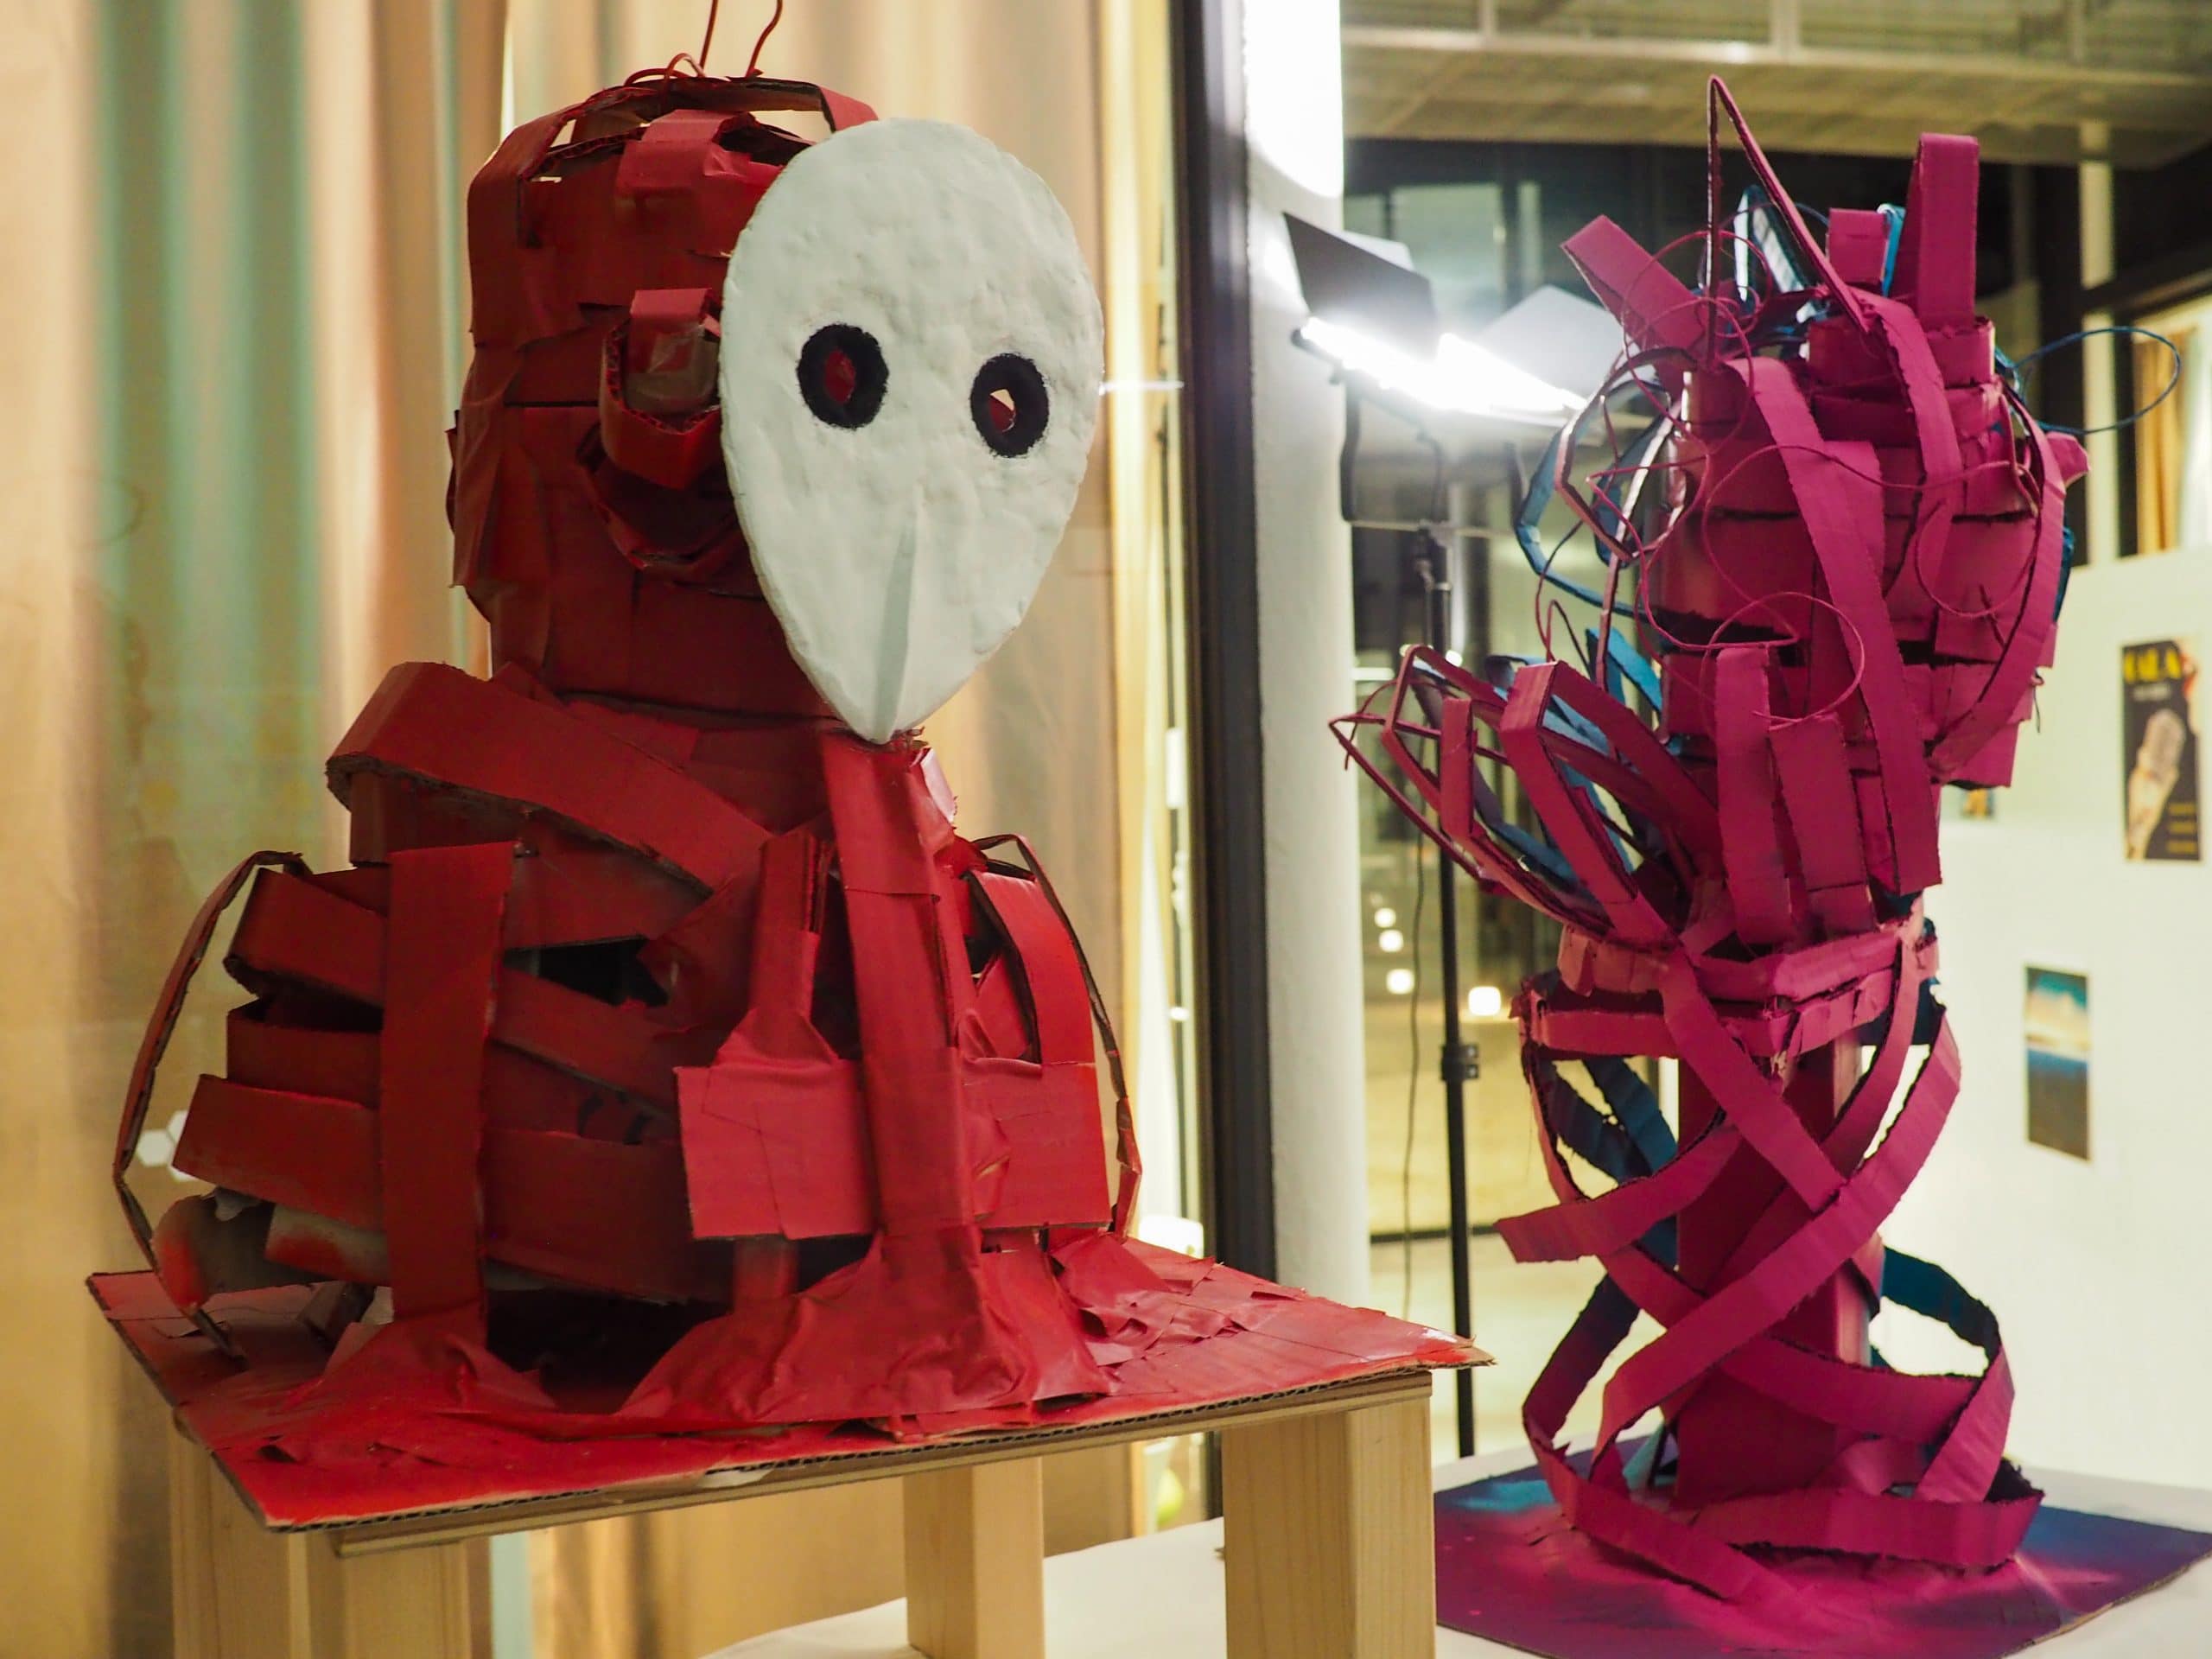 Student artwork made using cardboard on display at art exhibition